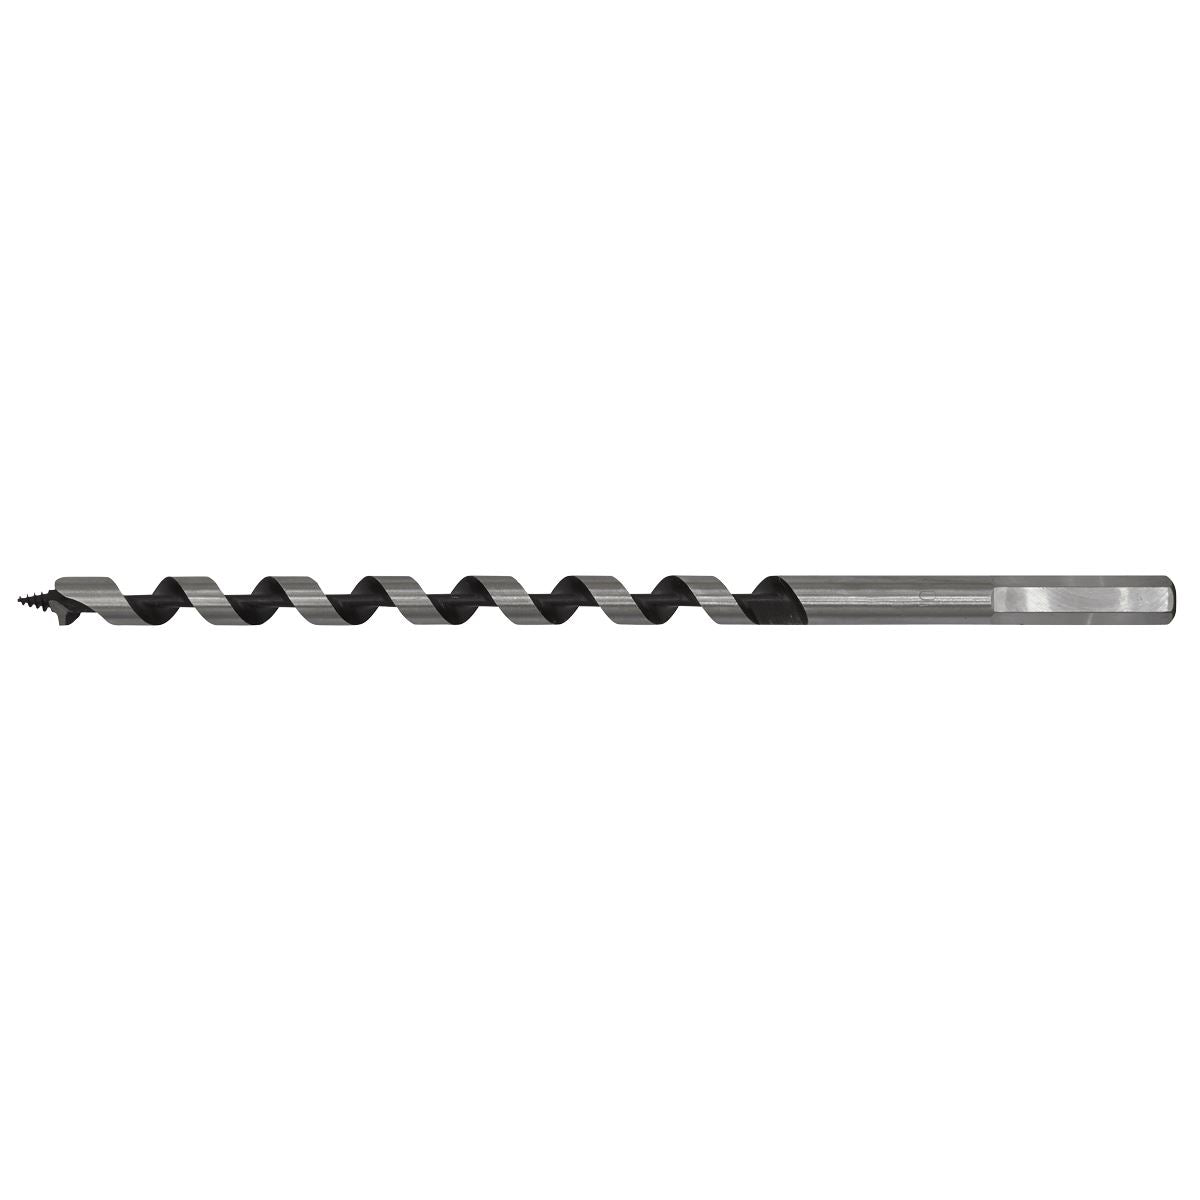 Worksafe by Sealey Auger Wood Drill Bit 10mm x 235mm